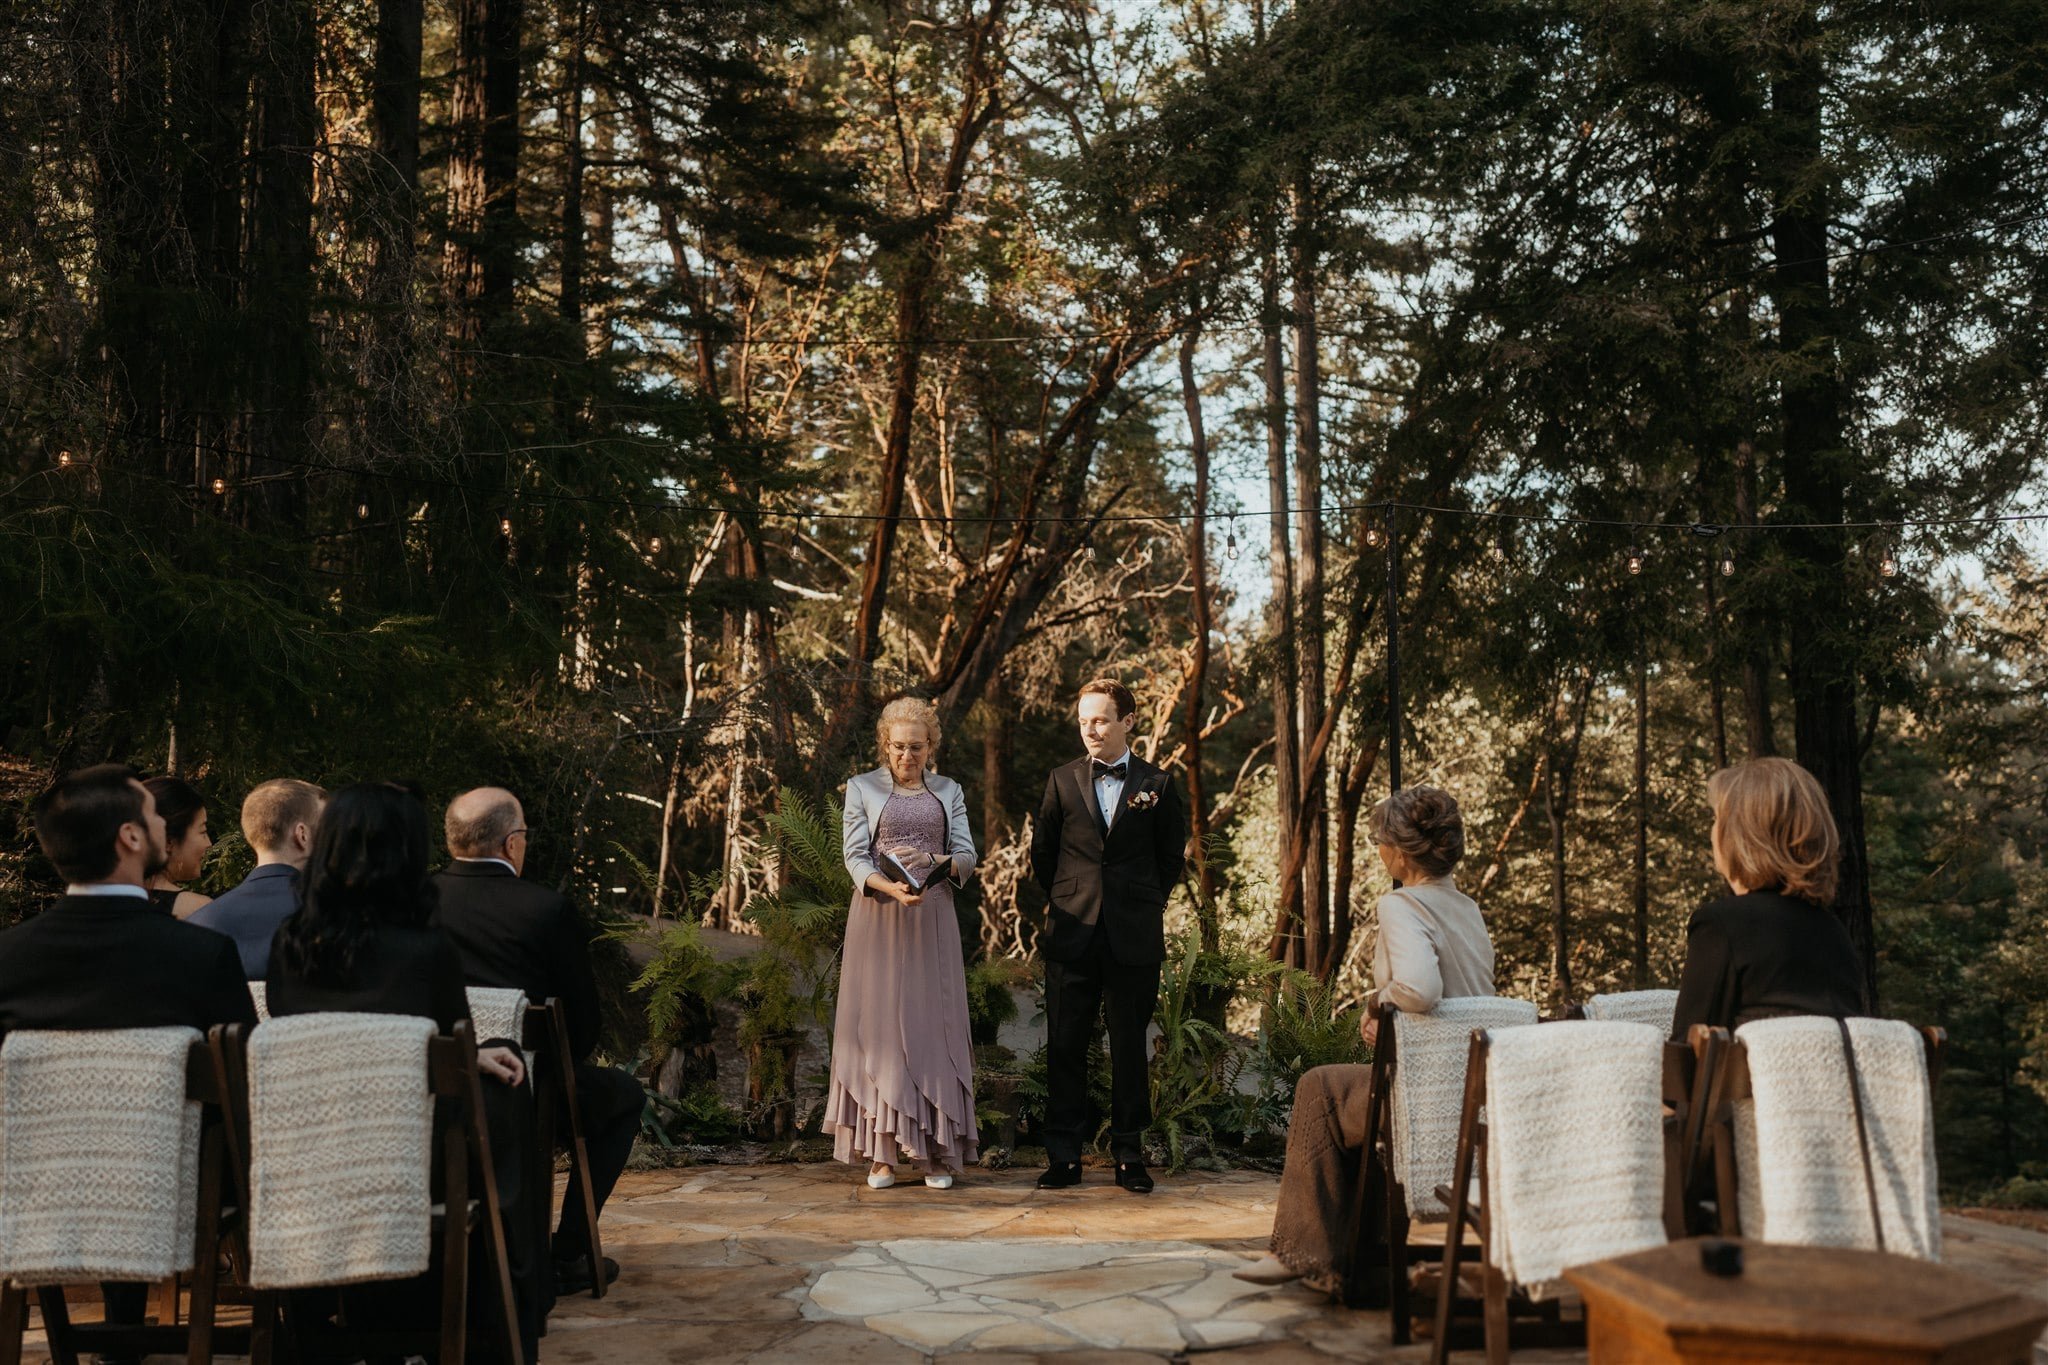 Groom waiting at the end of the aisle at winter wedding ceremony at Sequoia Retreat Center